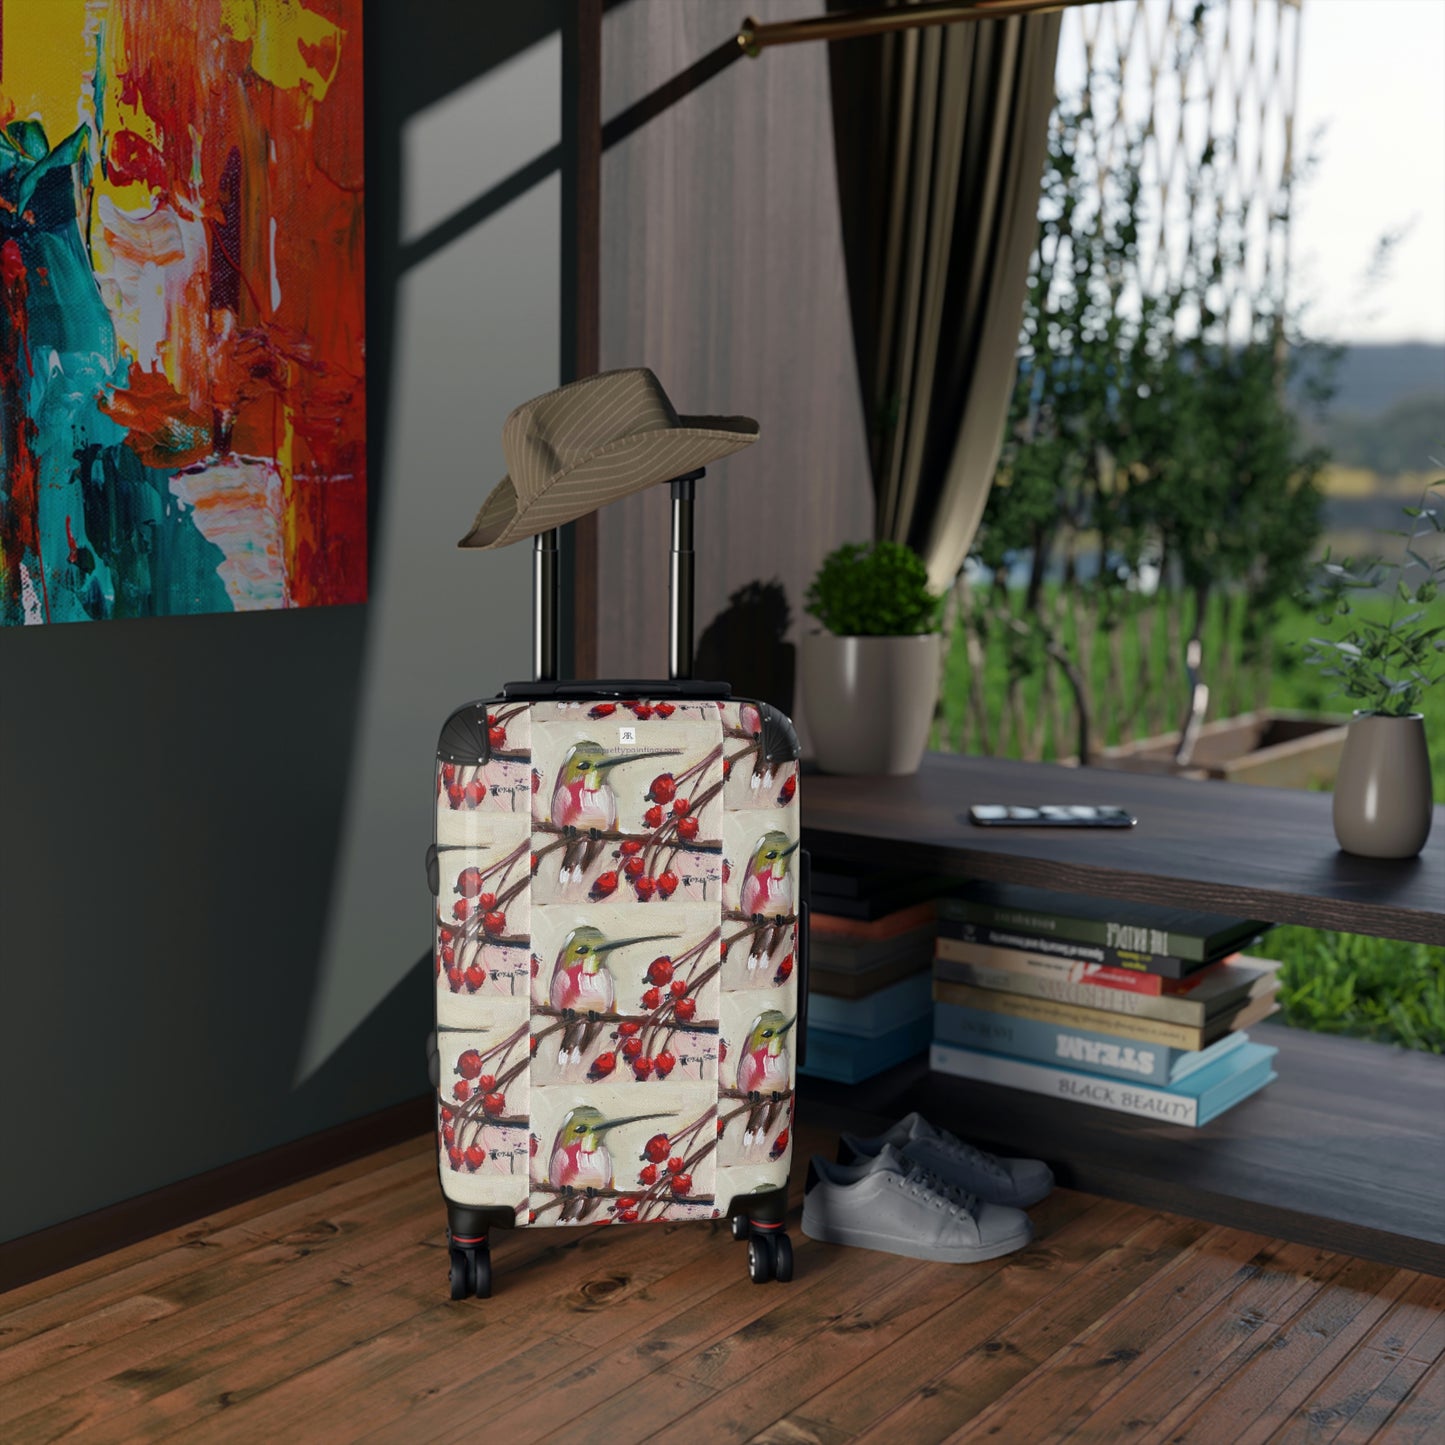 Hummingbird with Berries Patterned Carry on Suitcase (three sizes available)